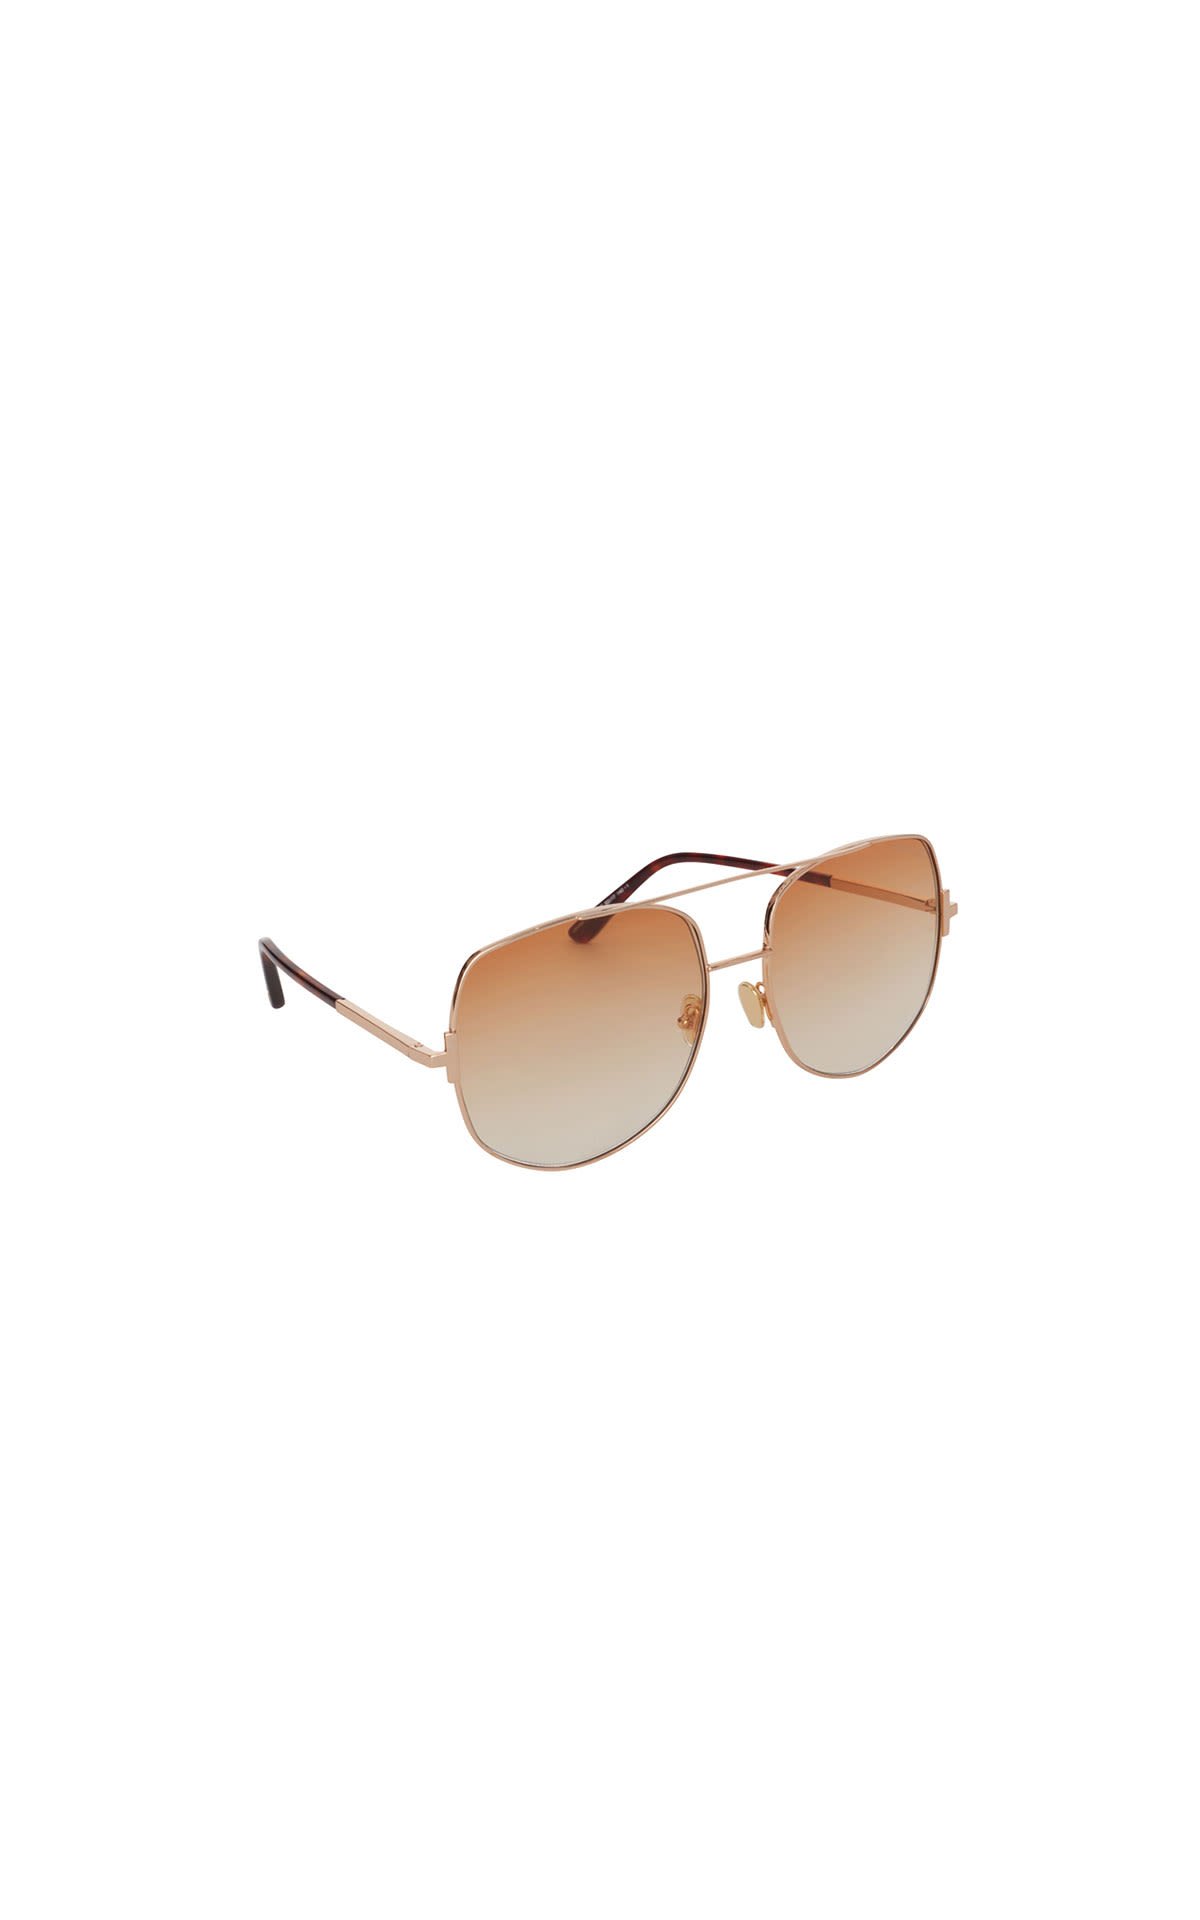 David Clulow Tom Ford pink gold sunglasses from Bicester Village